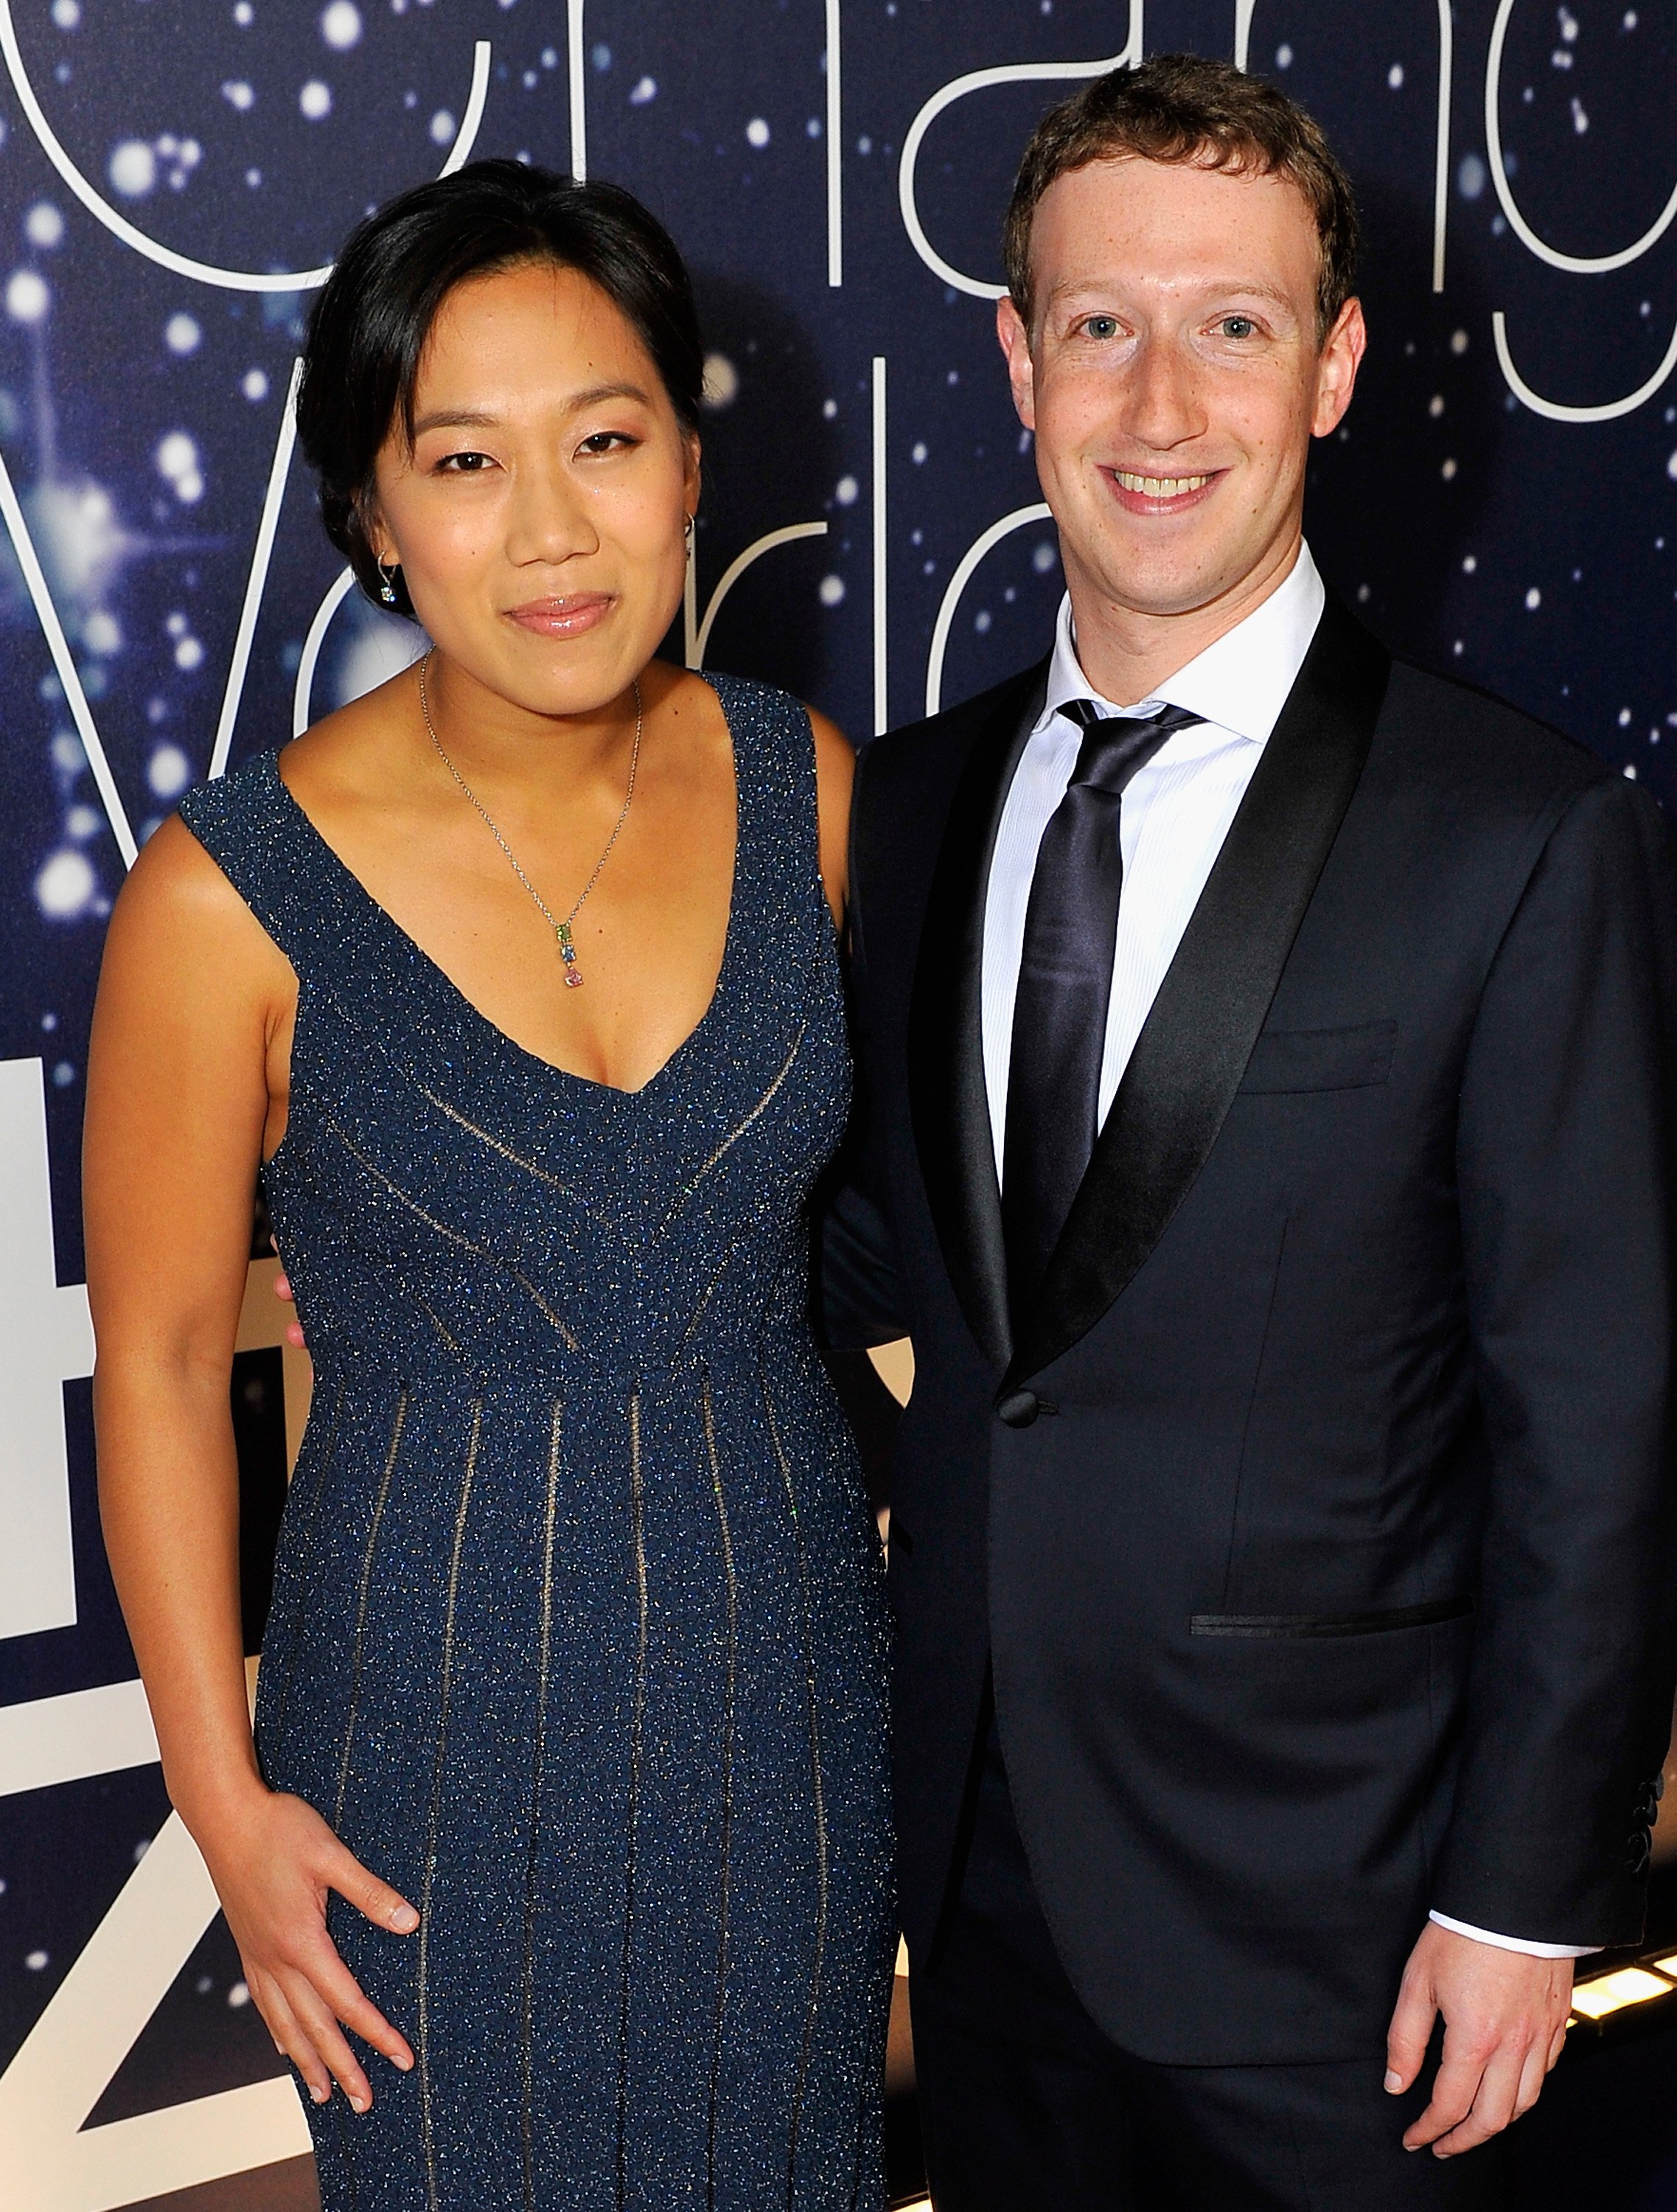 Priscilla Chan and Mark Zuckerberg attend the Breakthrough Prize Awards Ceremony Hosted By Seth MacFarlane at NASA Ames Research Center on November 9, 2014 | Photo: GettyImages